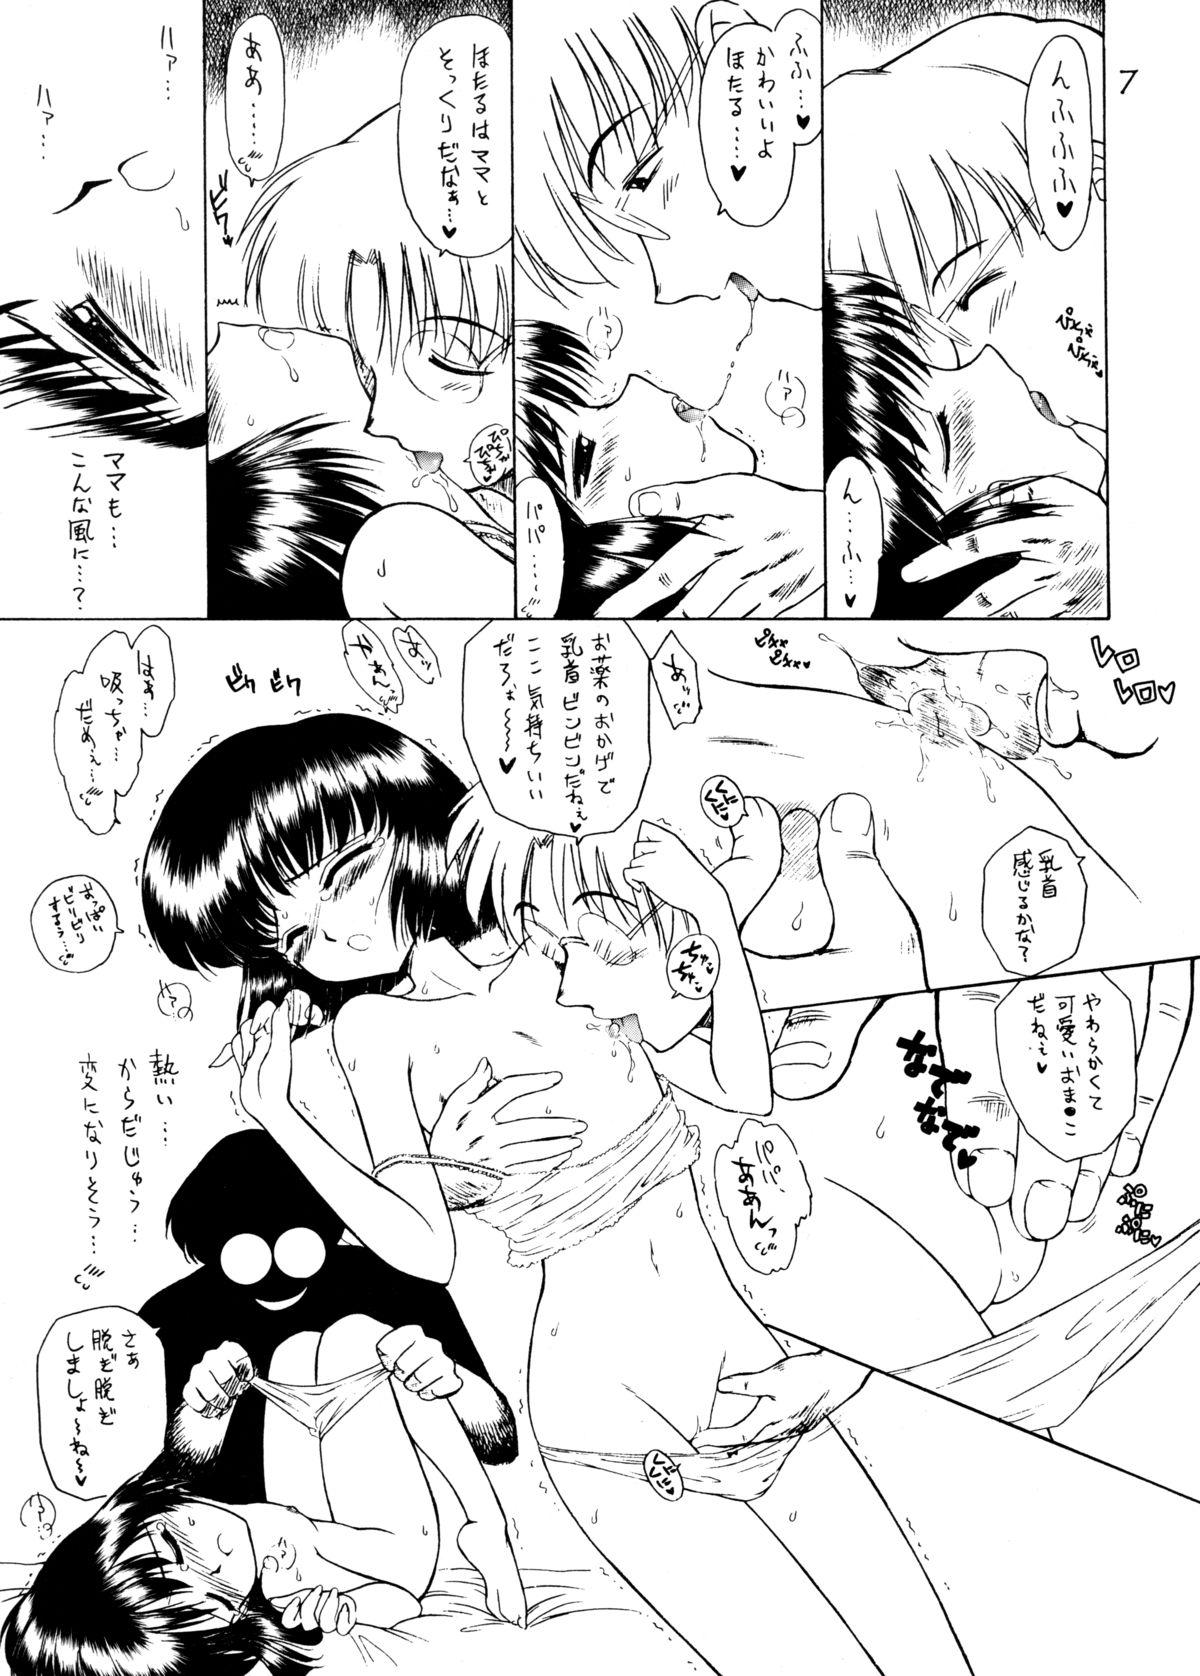 Prostitute Atom Heart Father - Sailor moon Spooning - Page 6